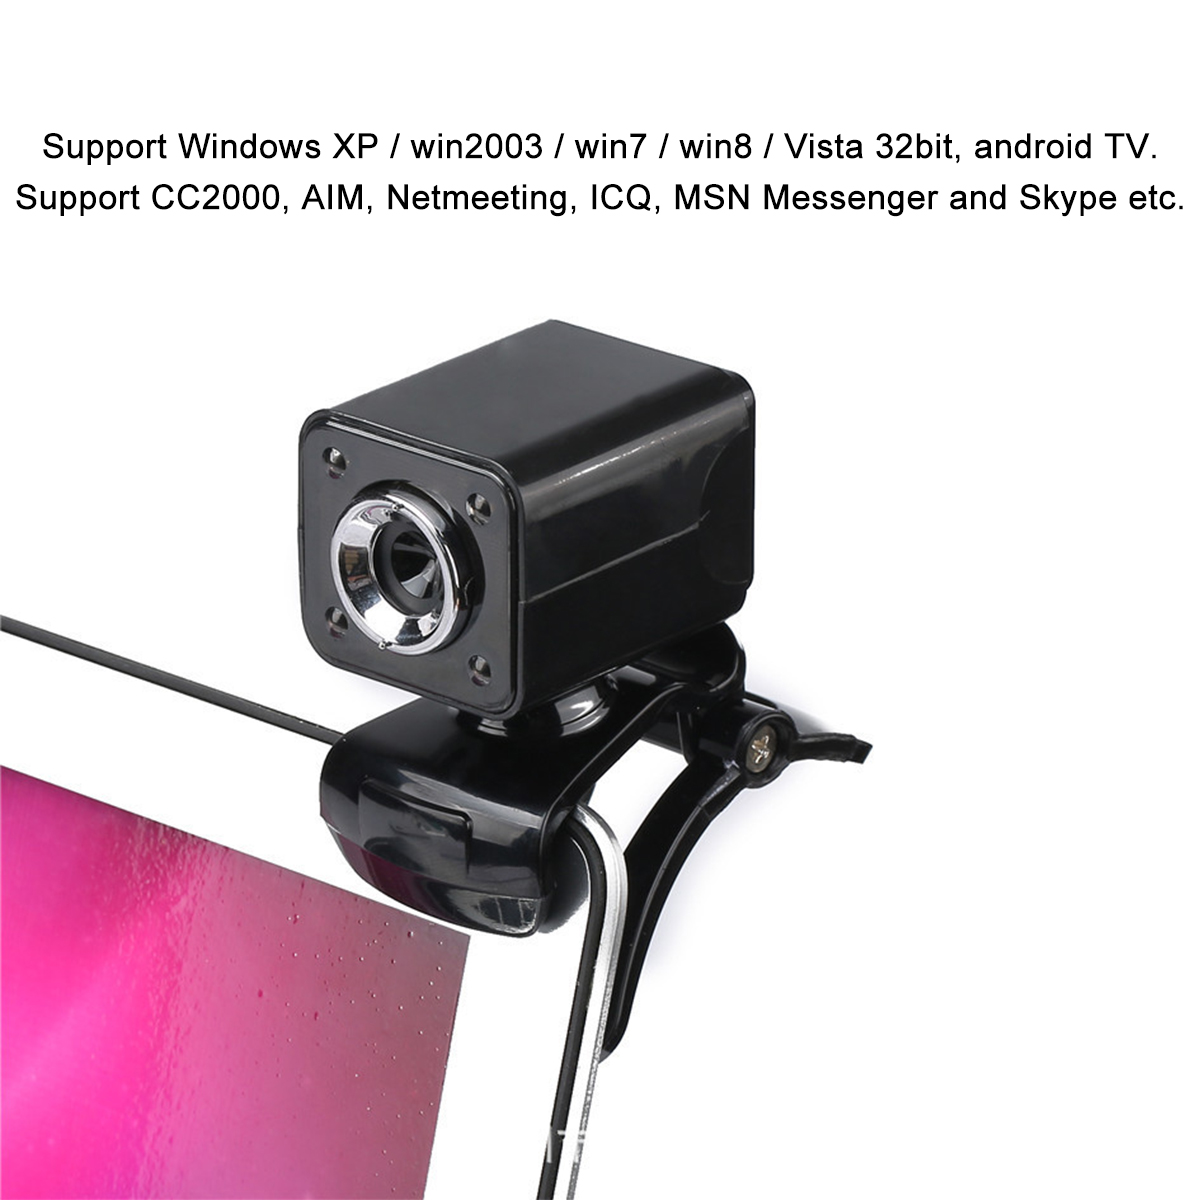 360deg-Rotation-USB-HD-Webcam-Camera-with-Built-in-Microphone-LED-Night-Vision-for-PC-Laptop-Desktop-1681680-3